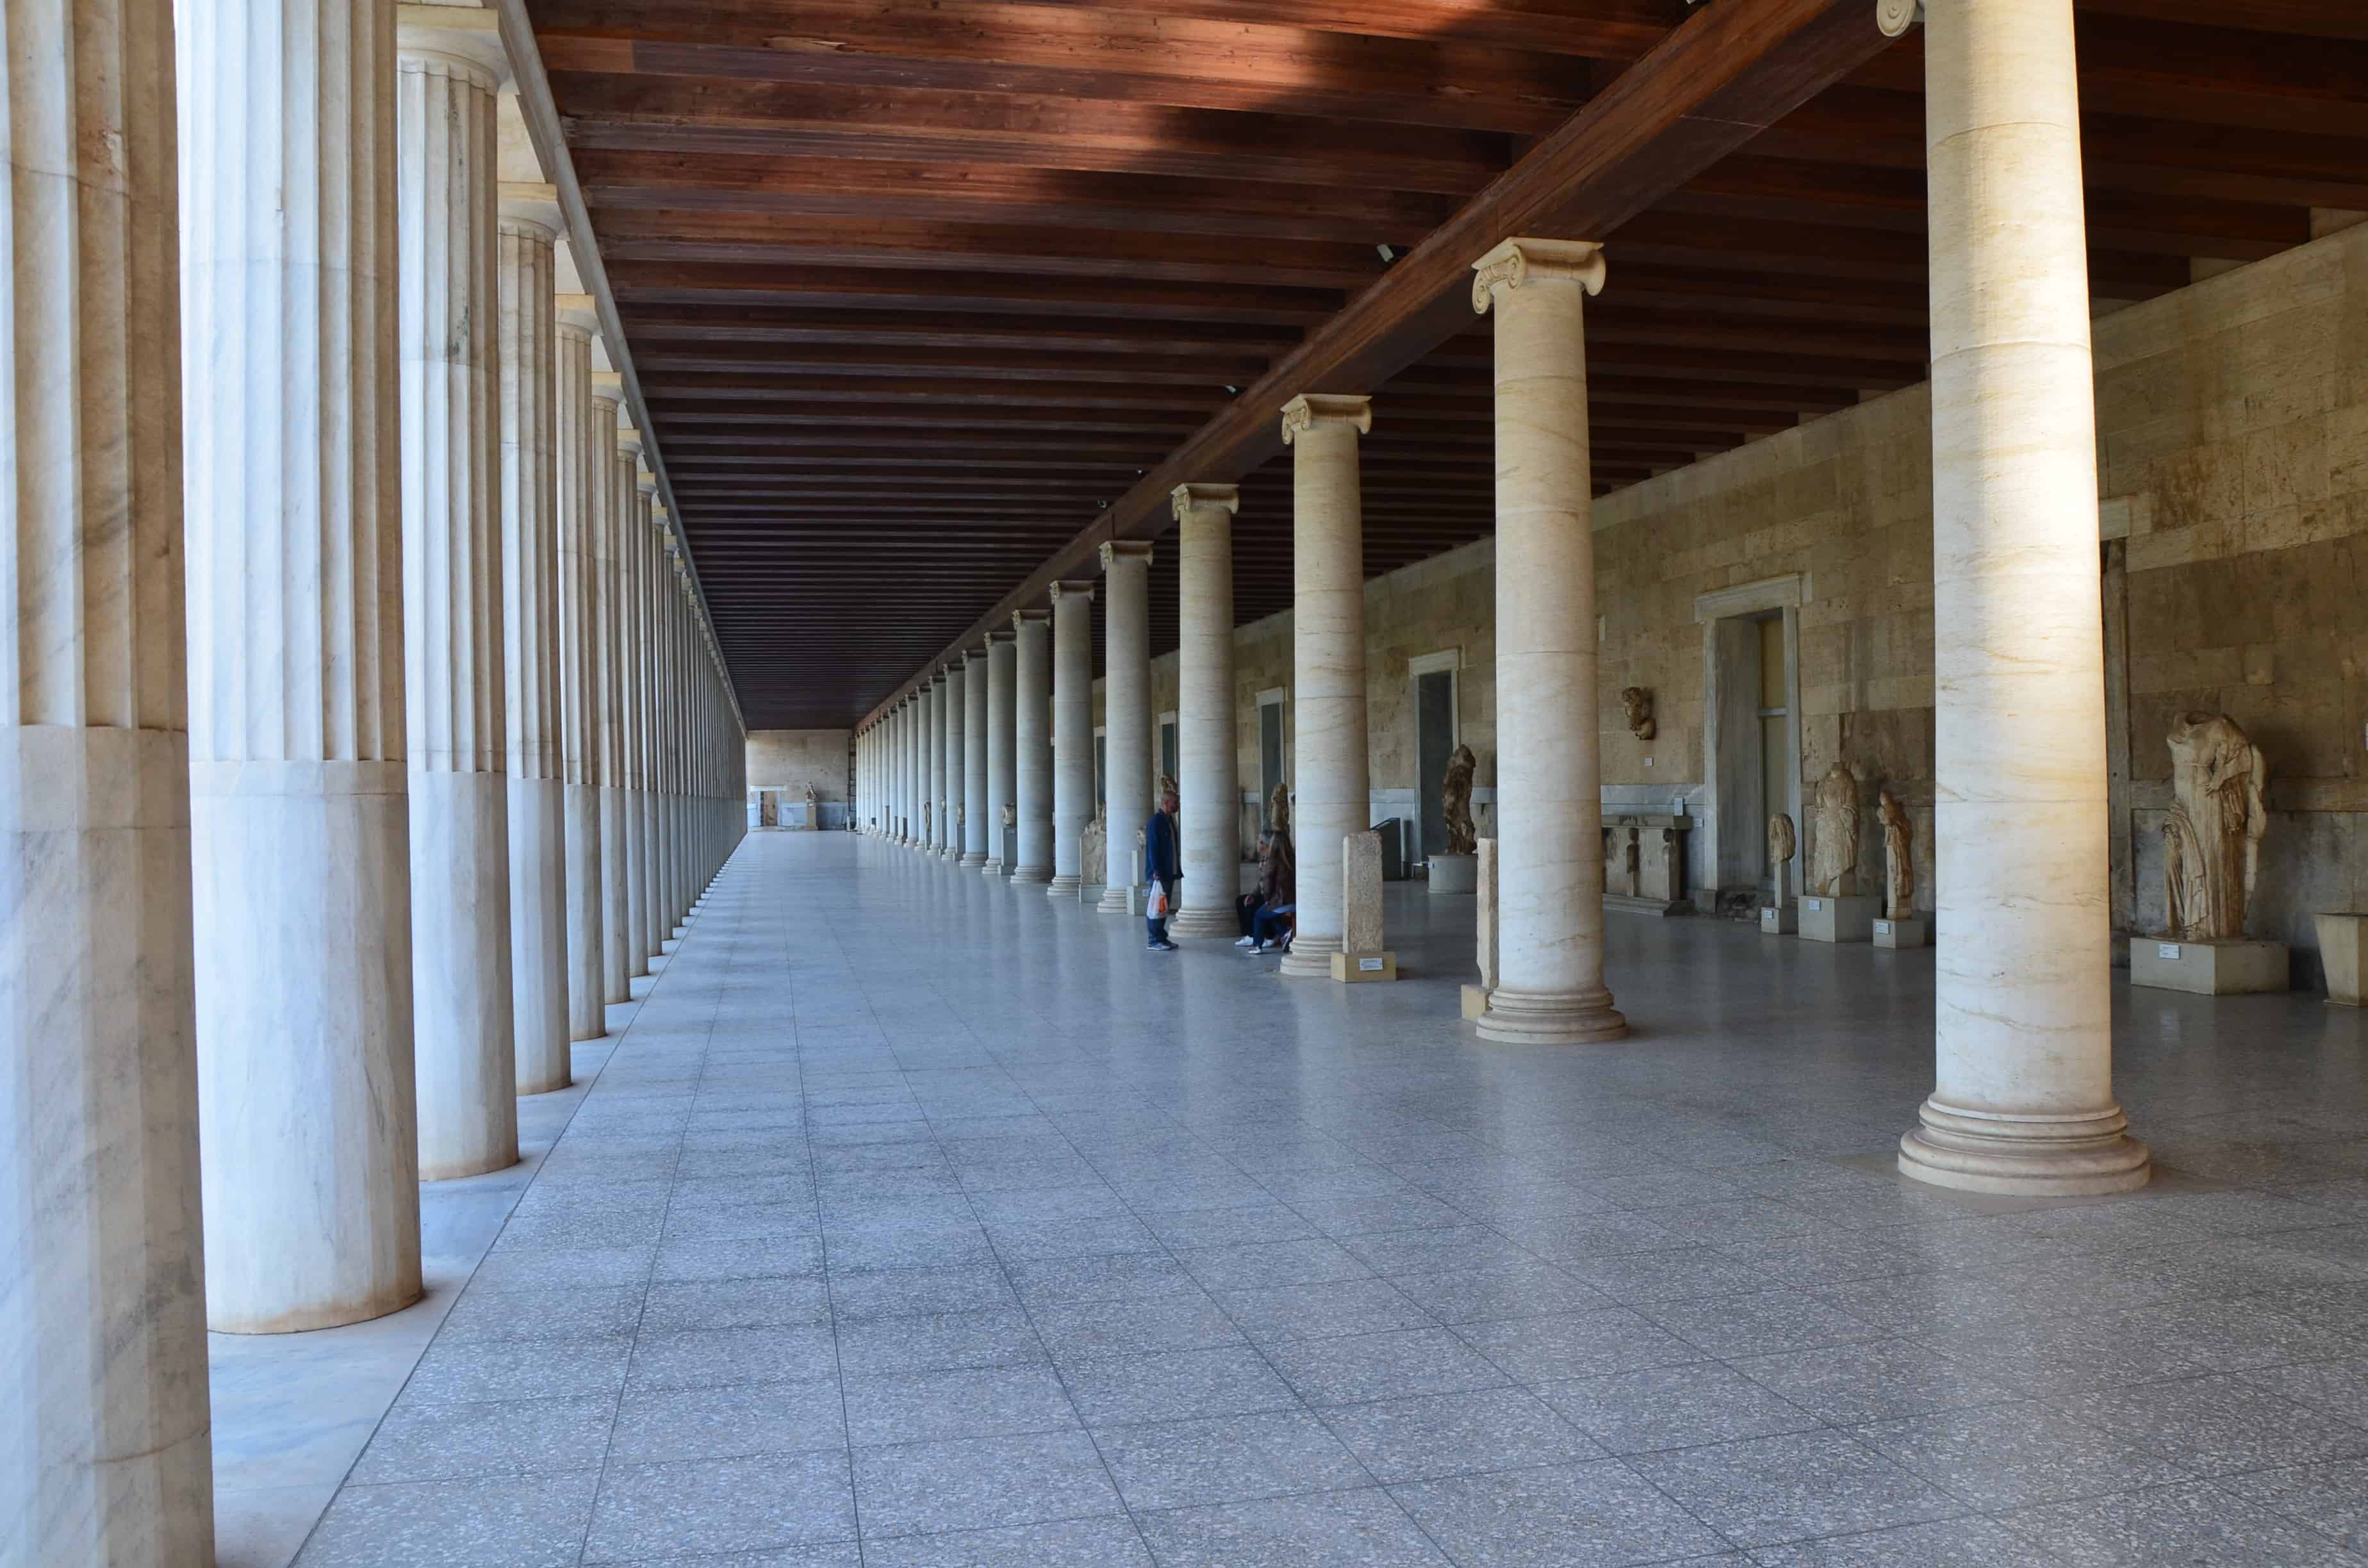 Ground floor of the Stoa of Attalos at the Agora in Athens, Greece